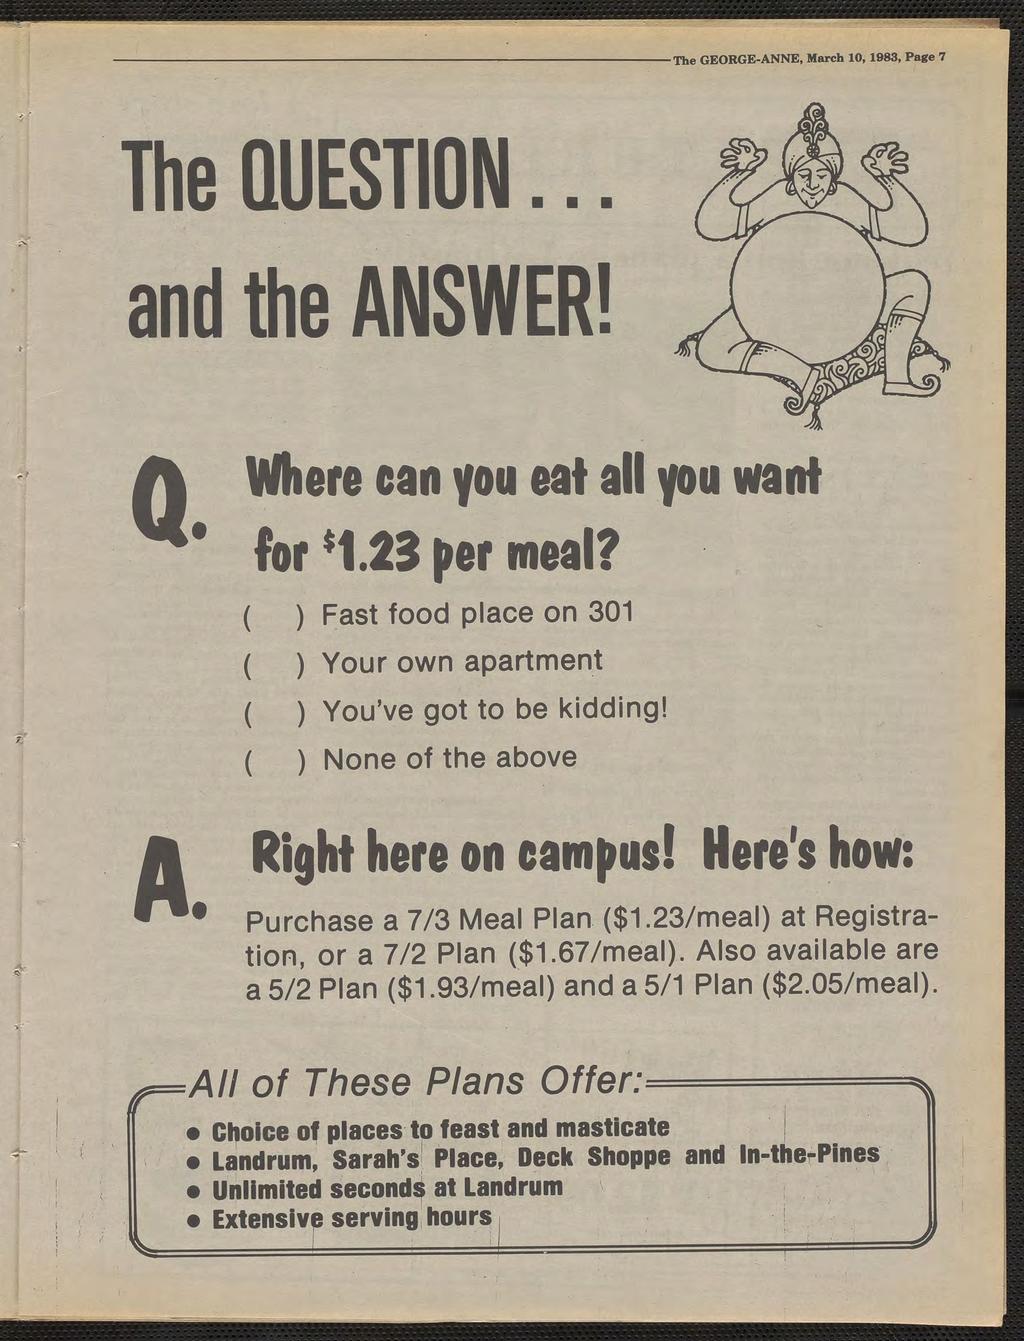 V The The GEORGE-ANNE, March 10,1983, Page 7 QUESTION... and the ANSWER! Where can you eat all you want for'1.23 per meal? ( ) Fast food place on 301 ( ) Your own apartment ( ) You've got to be kddng!